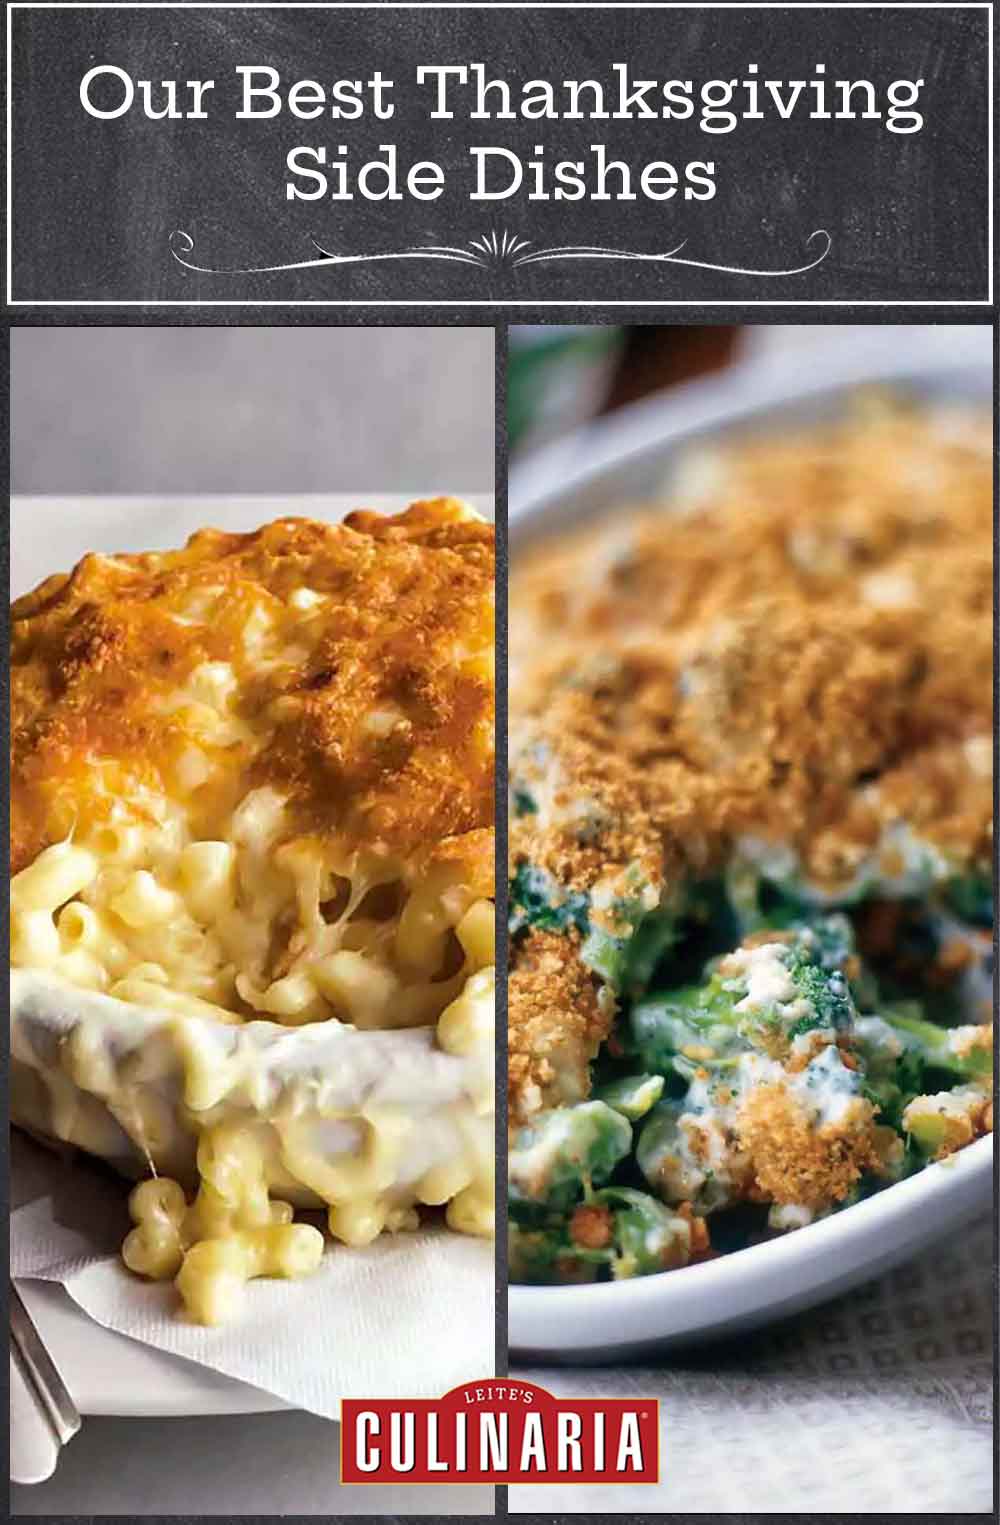 Images of two Thanksgiving side dish recipes -- macaroni au gratin, and broccoli blue cheese gratin.